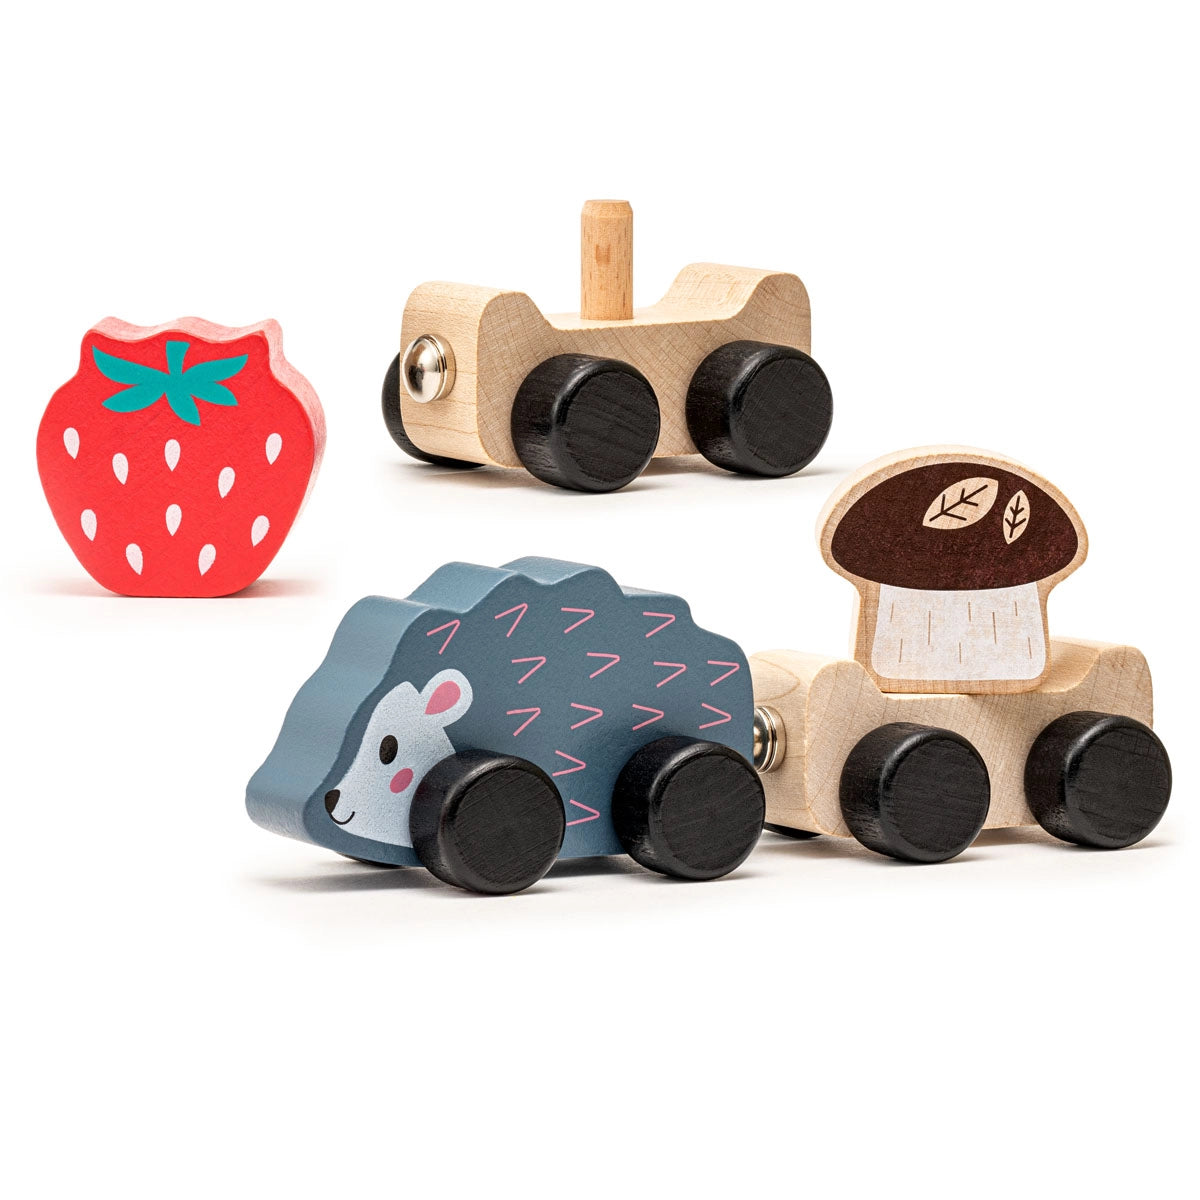 Clever Hedgehog - Wood Toy